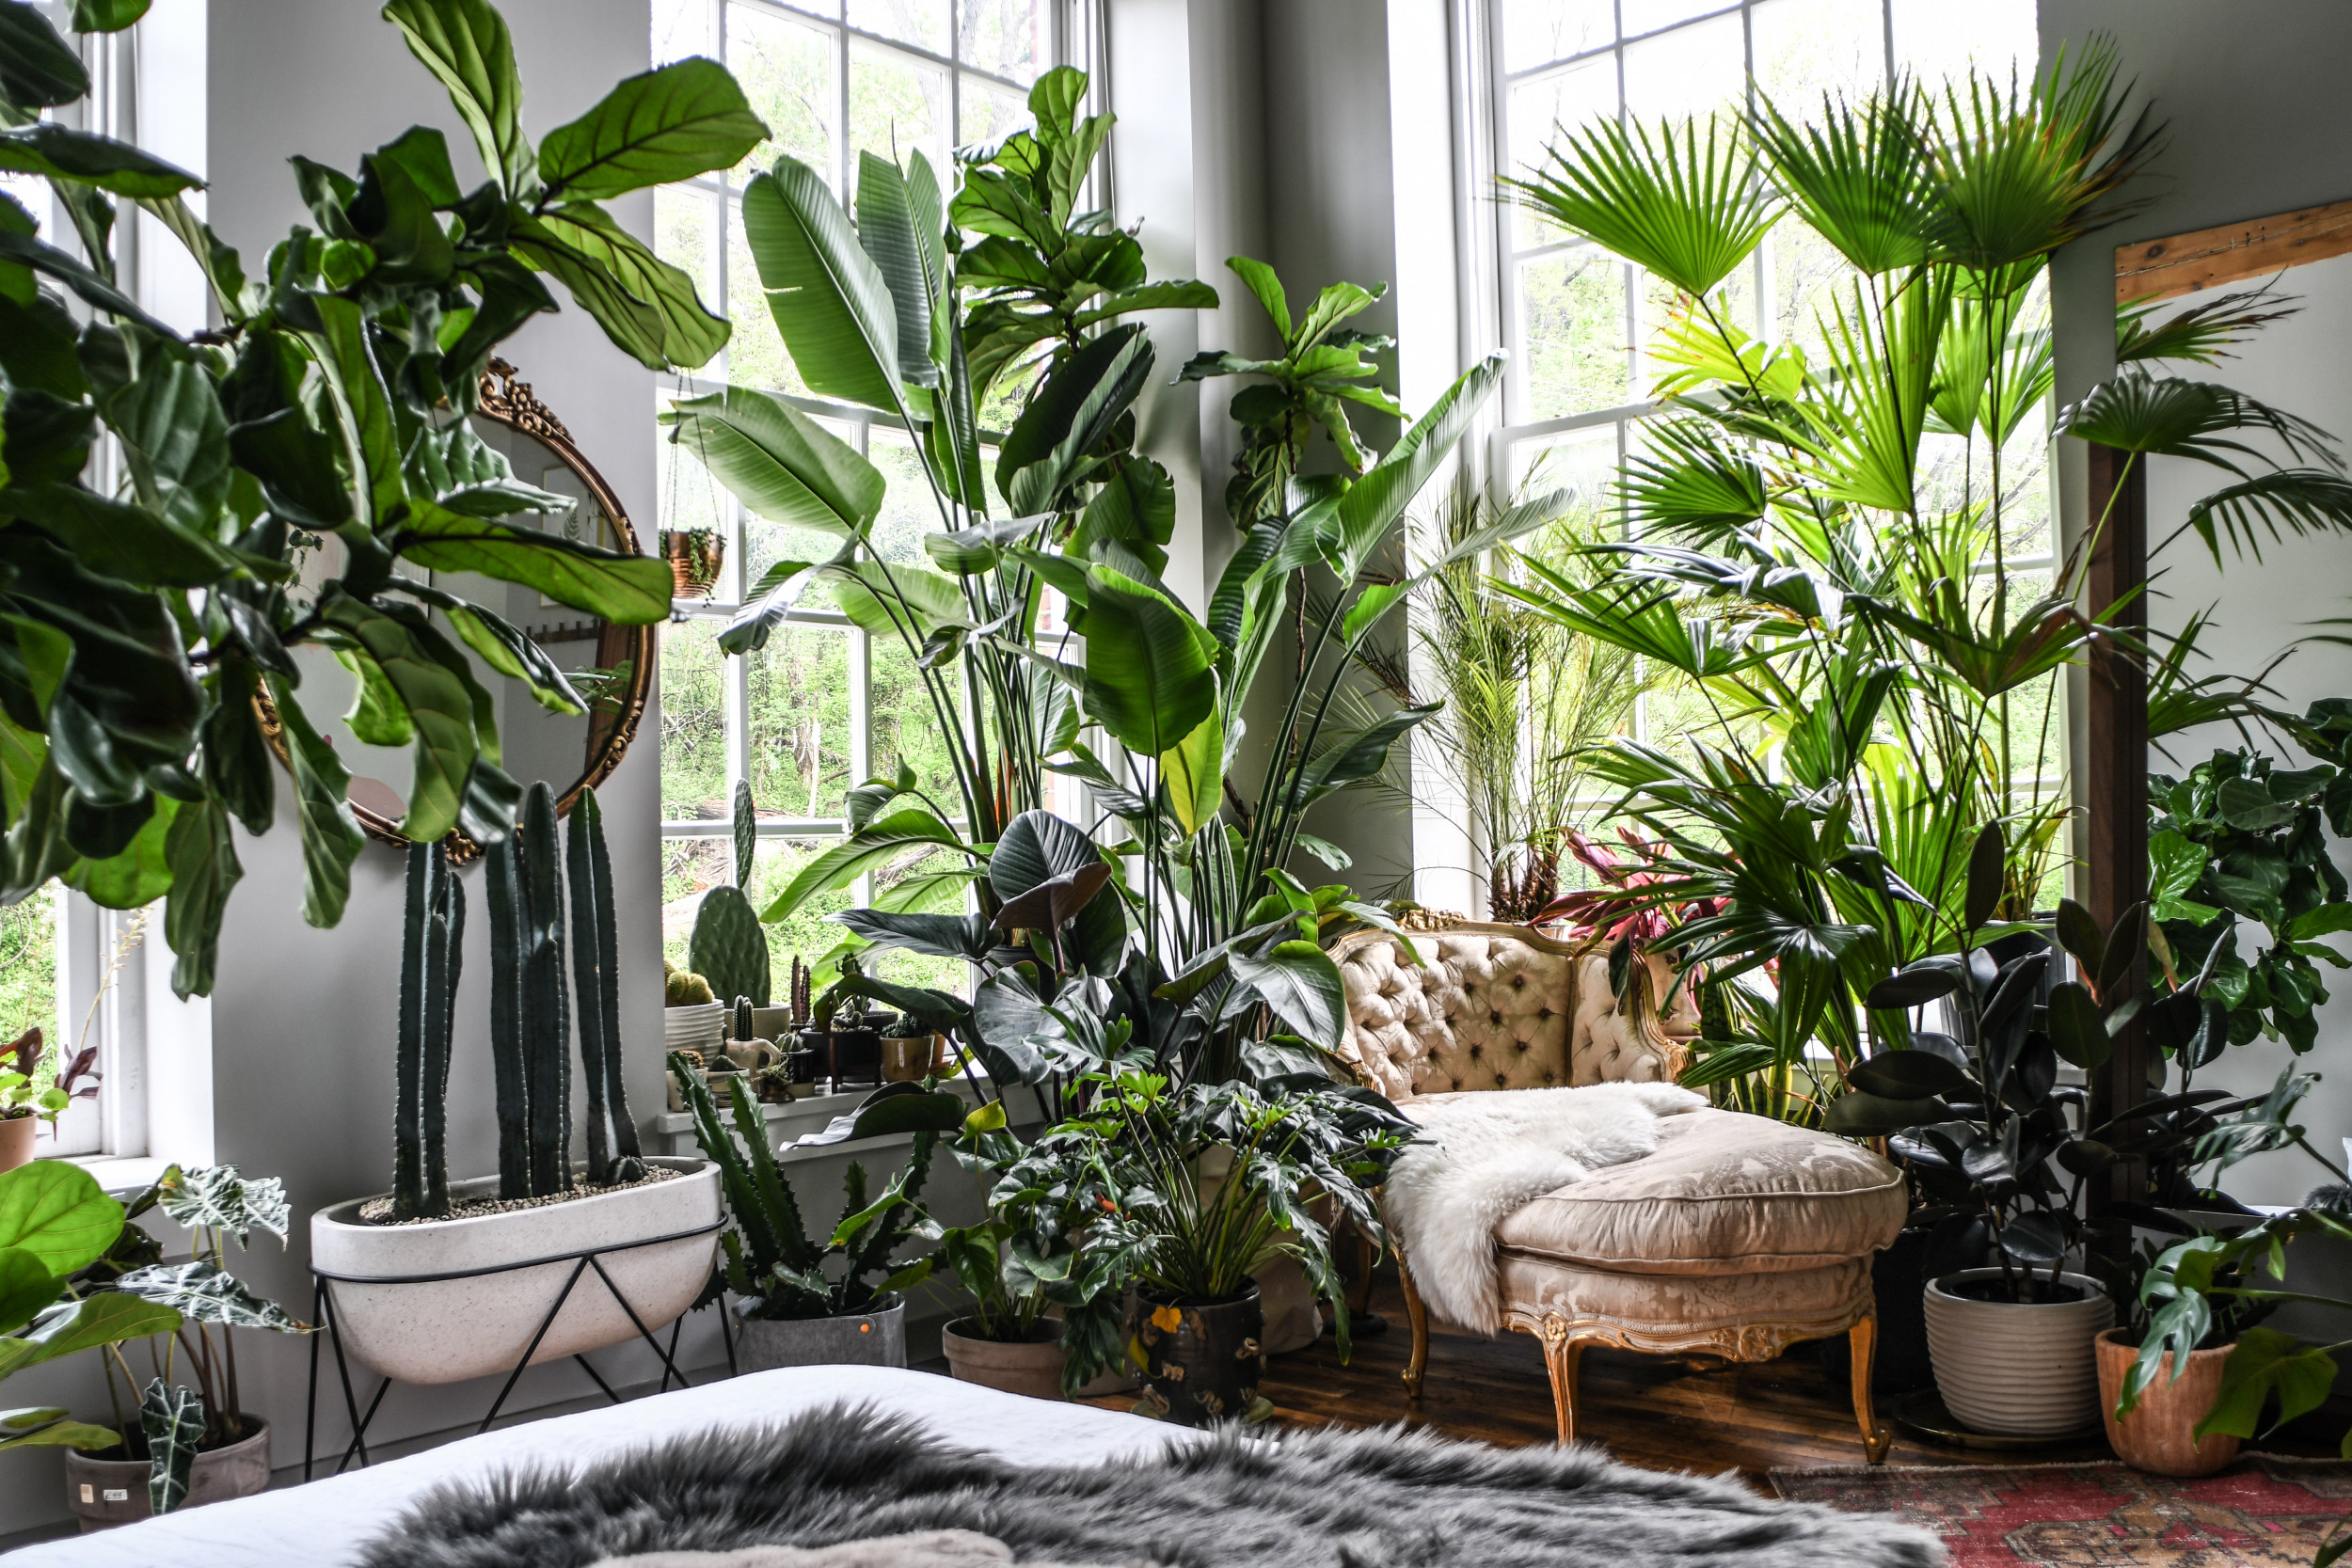 'I'm a Plant Stylist. Here Are 4 Tips to Make a More